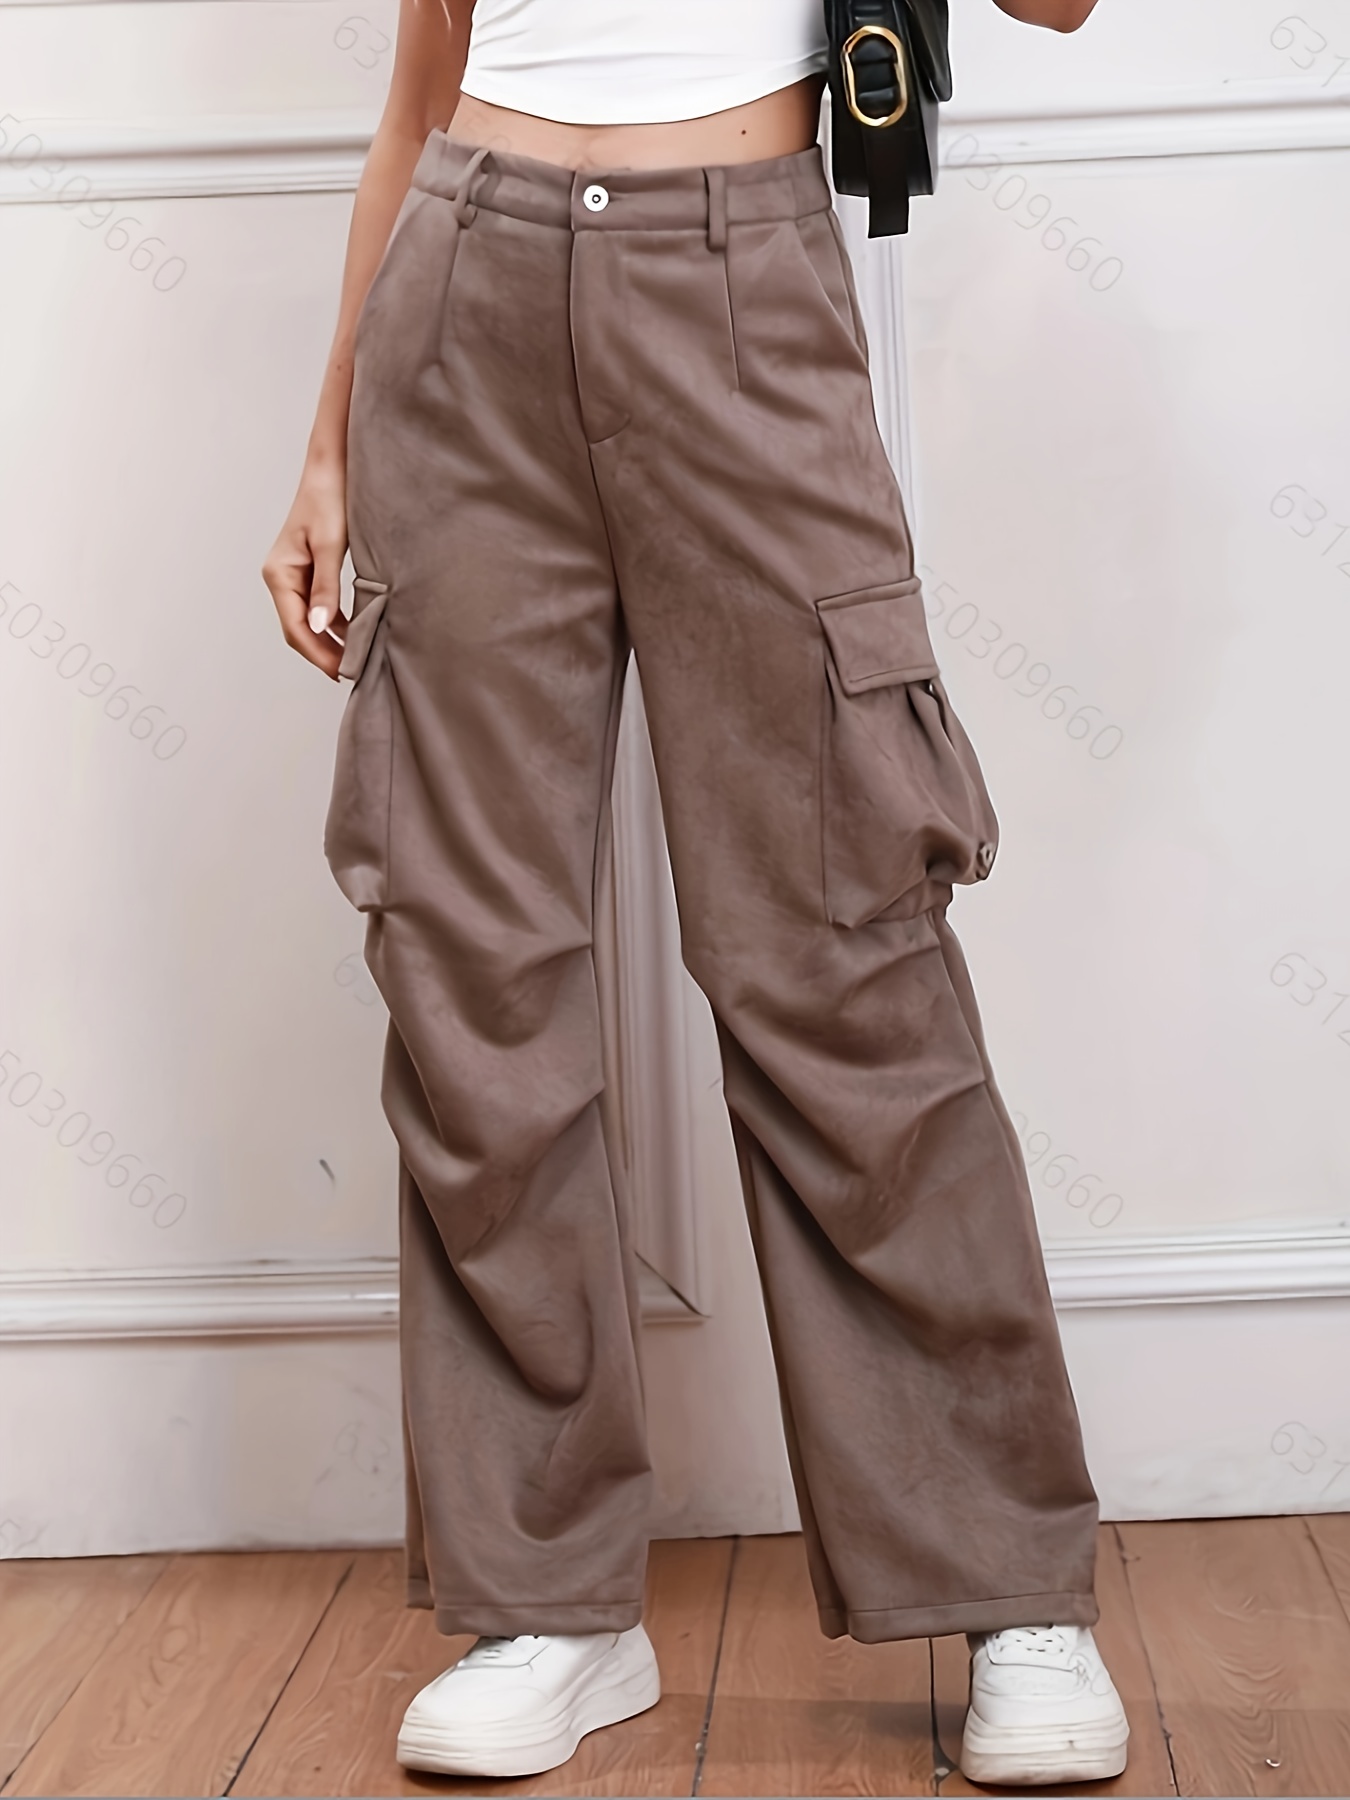 Suwequest Women High Waisted Fashion Baggy Cargo Pants wear Solid